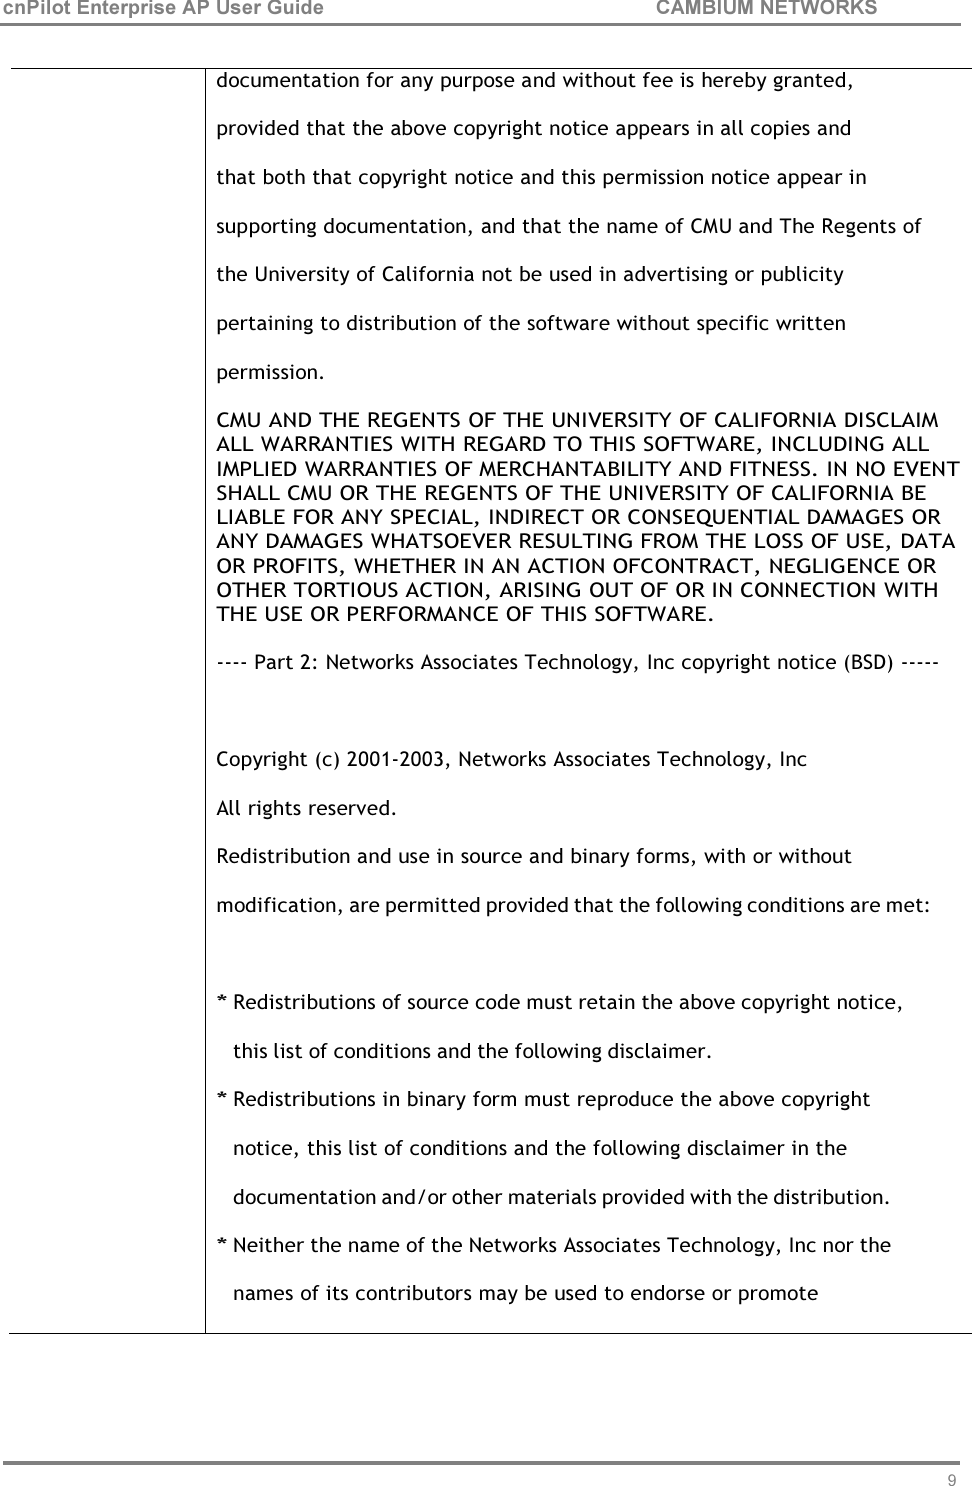 91 cnPilot Enterprise AP User Guide CAMBIUM NETWORKS      documentation for any purpose and without fee is hereby granted, provided that the above copyright notice appears in all copies and that both that copyright notice and this permission notice appear in supporting documentation, and that the name of CMU and The Regents of the University of California not be used in advertising or publicity pertaining to distribution of the software without specific written permission. CMU AND THE REGENTS OF THE UNIVERSITY OF CALIFORNIA DISCLAIM ALL WARRANTIES WITH REGARD TO THIS SOFTWARE, INCLUDING ALL IMPLIED WARRANTIES OF MERCHANTABILITY AND FITNESS. IN NO EVENT SHALL CMU OR THE REGENTS OF THE UNIVERSITY OF CALIFORNIA BE LIABLE FOR ANY SPECIAL, INDIRECT OR CONSEQUENTIAL DAMAGES OR ANY DAMAGES WHATSOEVER RESULTING FROM THE LOSS OF USE, DATA OR PROFITS, WHETHER IN AN ACTION OFCONTRACT, NEGLIGENCE OR OTHER TORTIOUS ACTION, ARISING OUT OF OR IN CONNECTION WITH THE USE OR PERFORMANCE OF THIS SOFTWARE.  ---- Part 2: Networks Associates Technology, Inc copyright notice (BSD) -----   Copyright (c) 2001-2003, Networks Associates Technology, Inc All rights reserved. Redistribution and use in source and binary forms, with or without modification, are permitted provided that the following conditions are met:  * Redistributions of source code must retain the above copyright notice, this list of conditions and the following disclaimer. * Redistributions in binary form must reproduce the above copyright notice, this list of conditions and the following disclaimer in the documentation and/or other materials provided with the distribution. * Neither the name of the Networks Associates Technology, Inc nor the  names of its contributors may be used to endorse or promote 